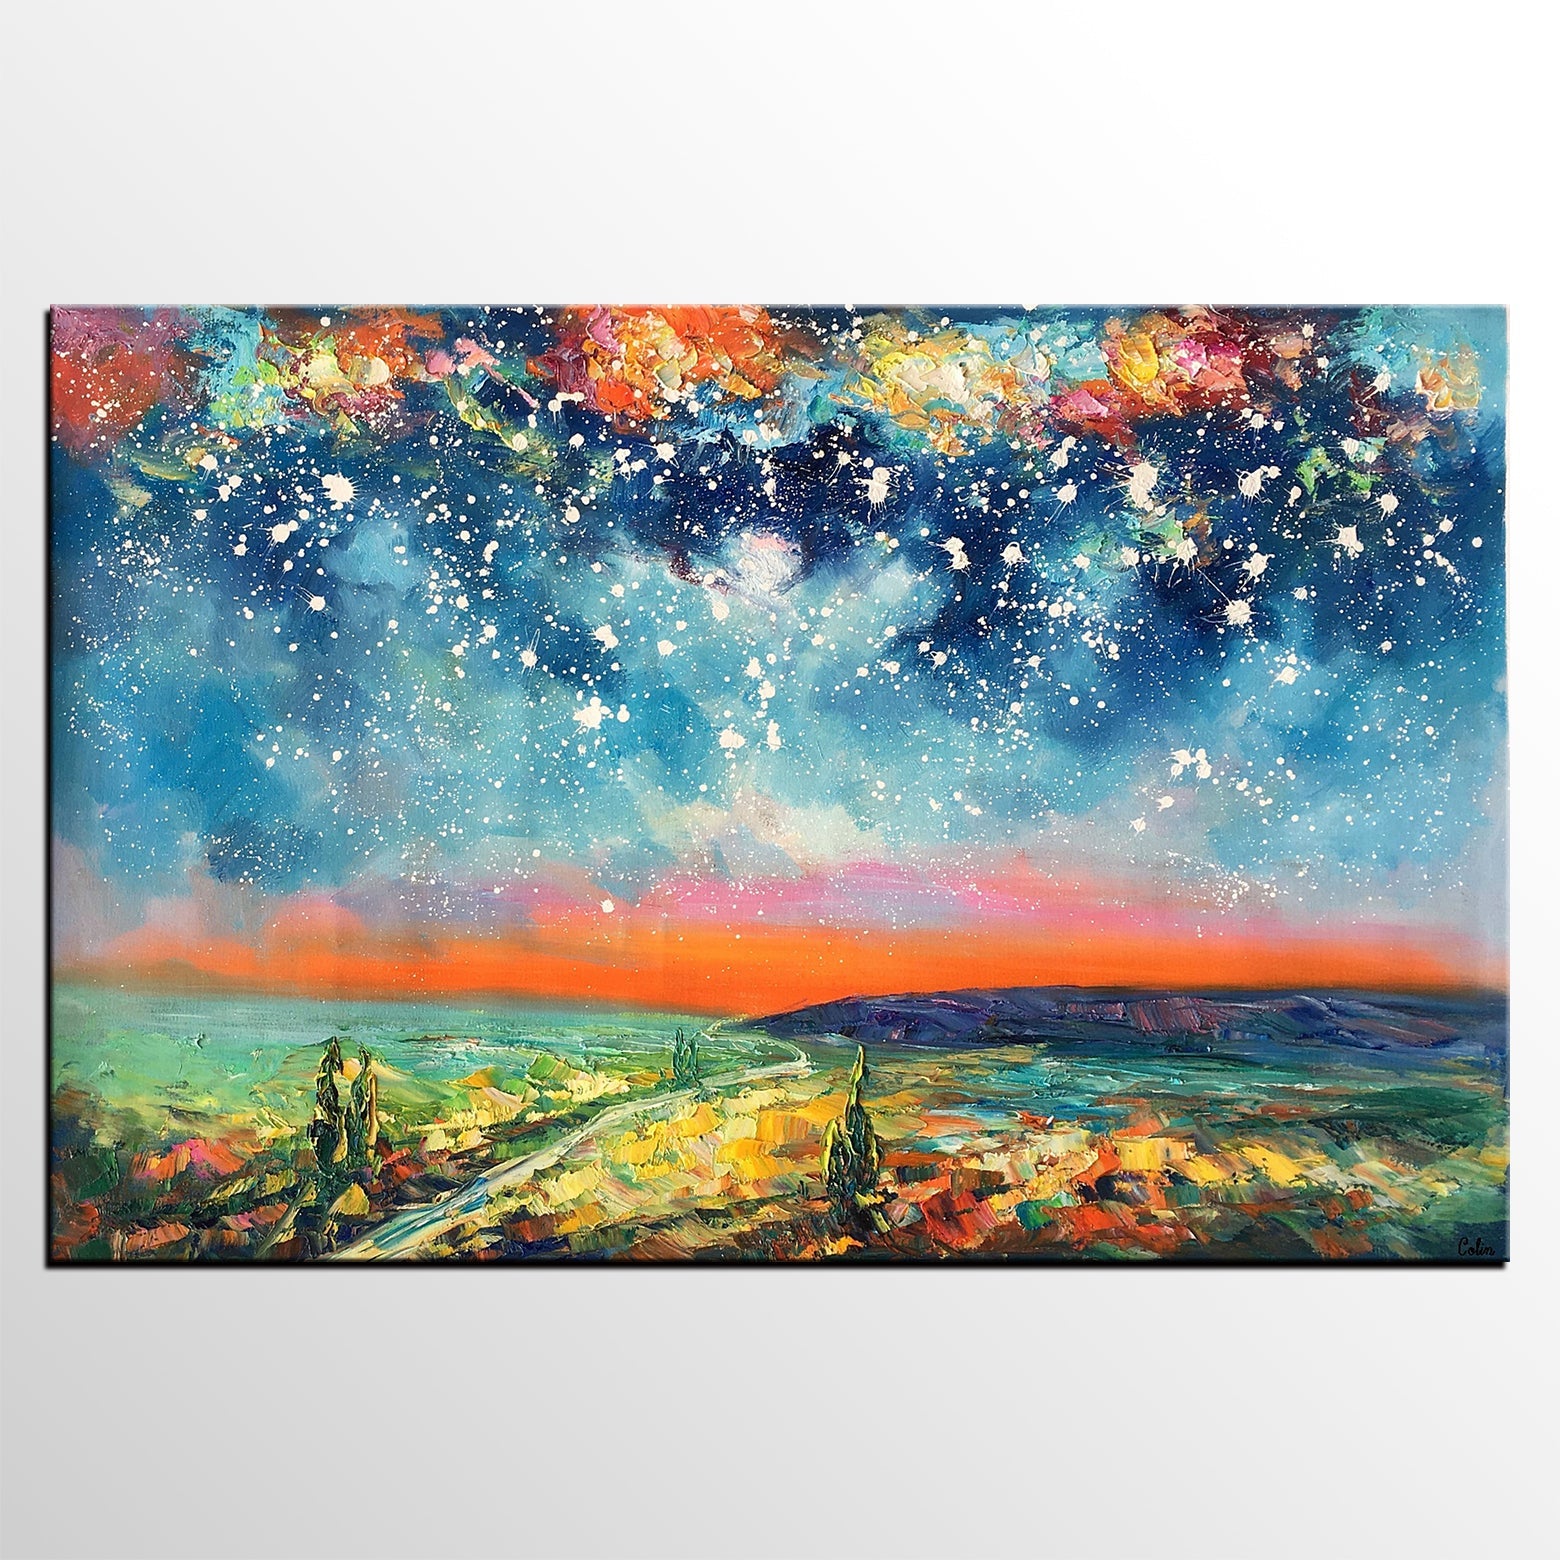 Buy Art Online, Abstract Art for Sale, Starry Night Sky Painting, Custom Extra Large Painting-Paintingforhome